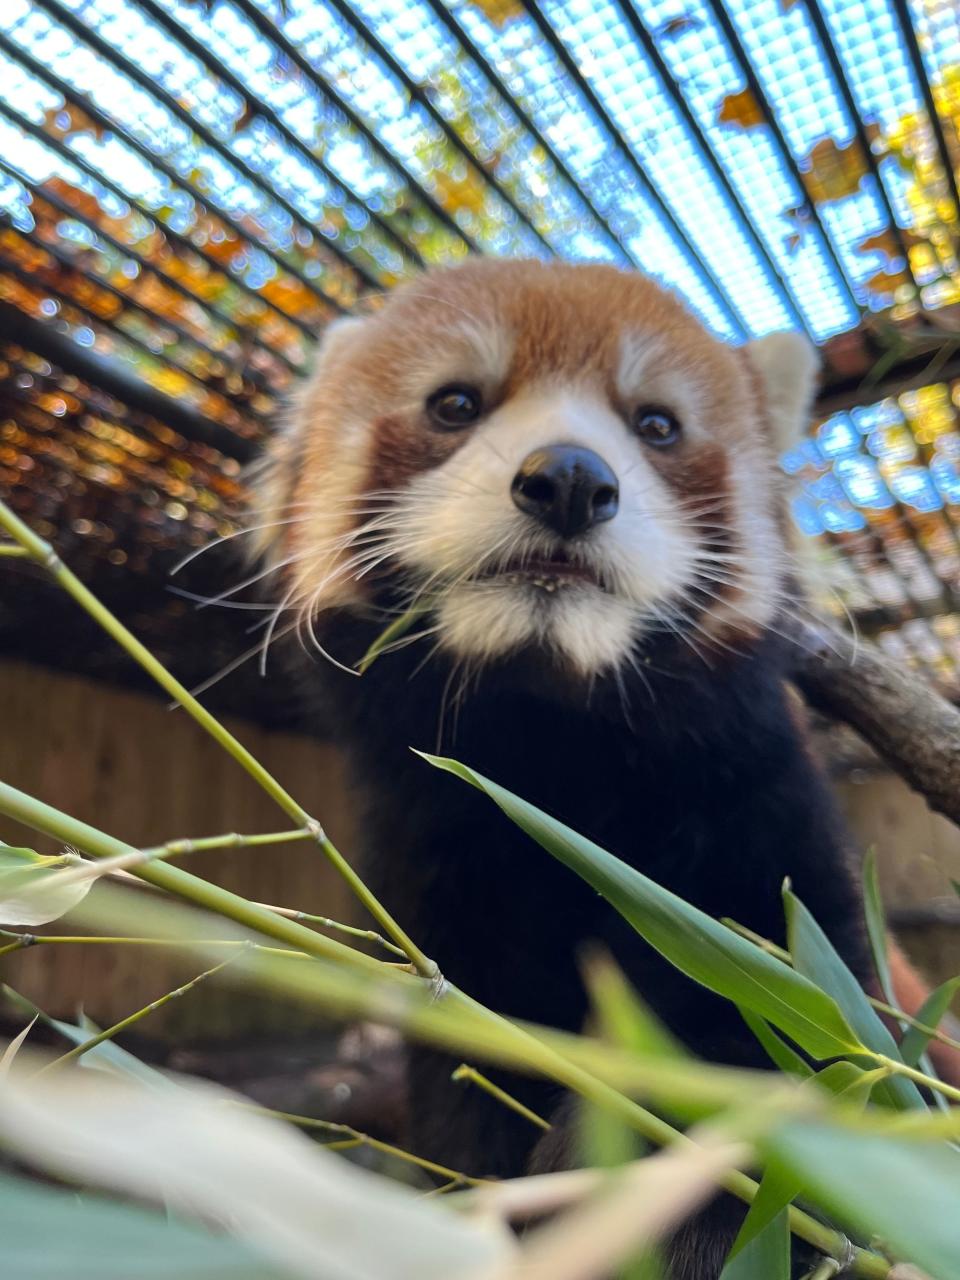 Mei Lin, the red panda, was elected the first PreZOOdent of the Utica Zoo